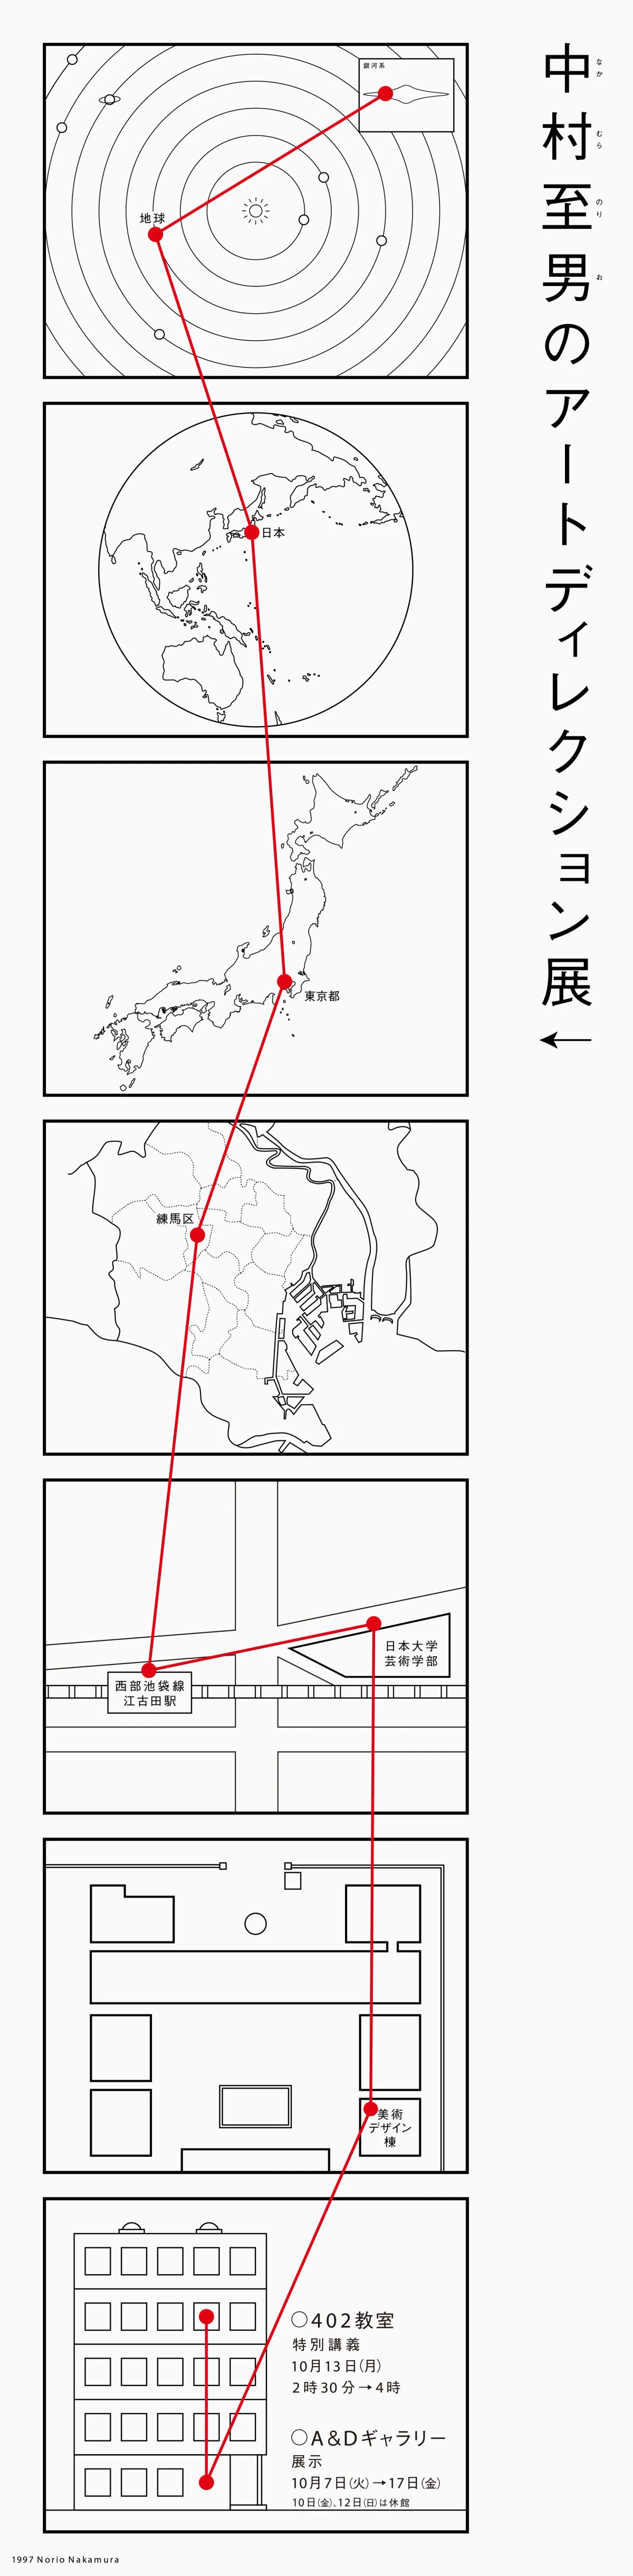 A series of illustrations, including a map, a globe, and a building, all connected by a red line. Includes a vertical line of Japanese characters.